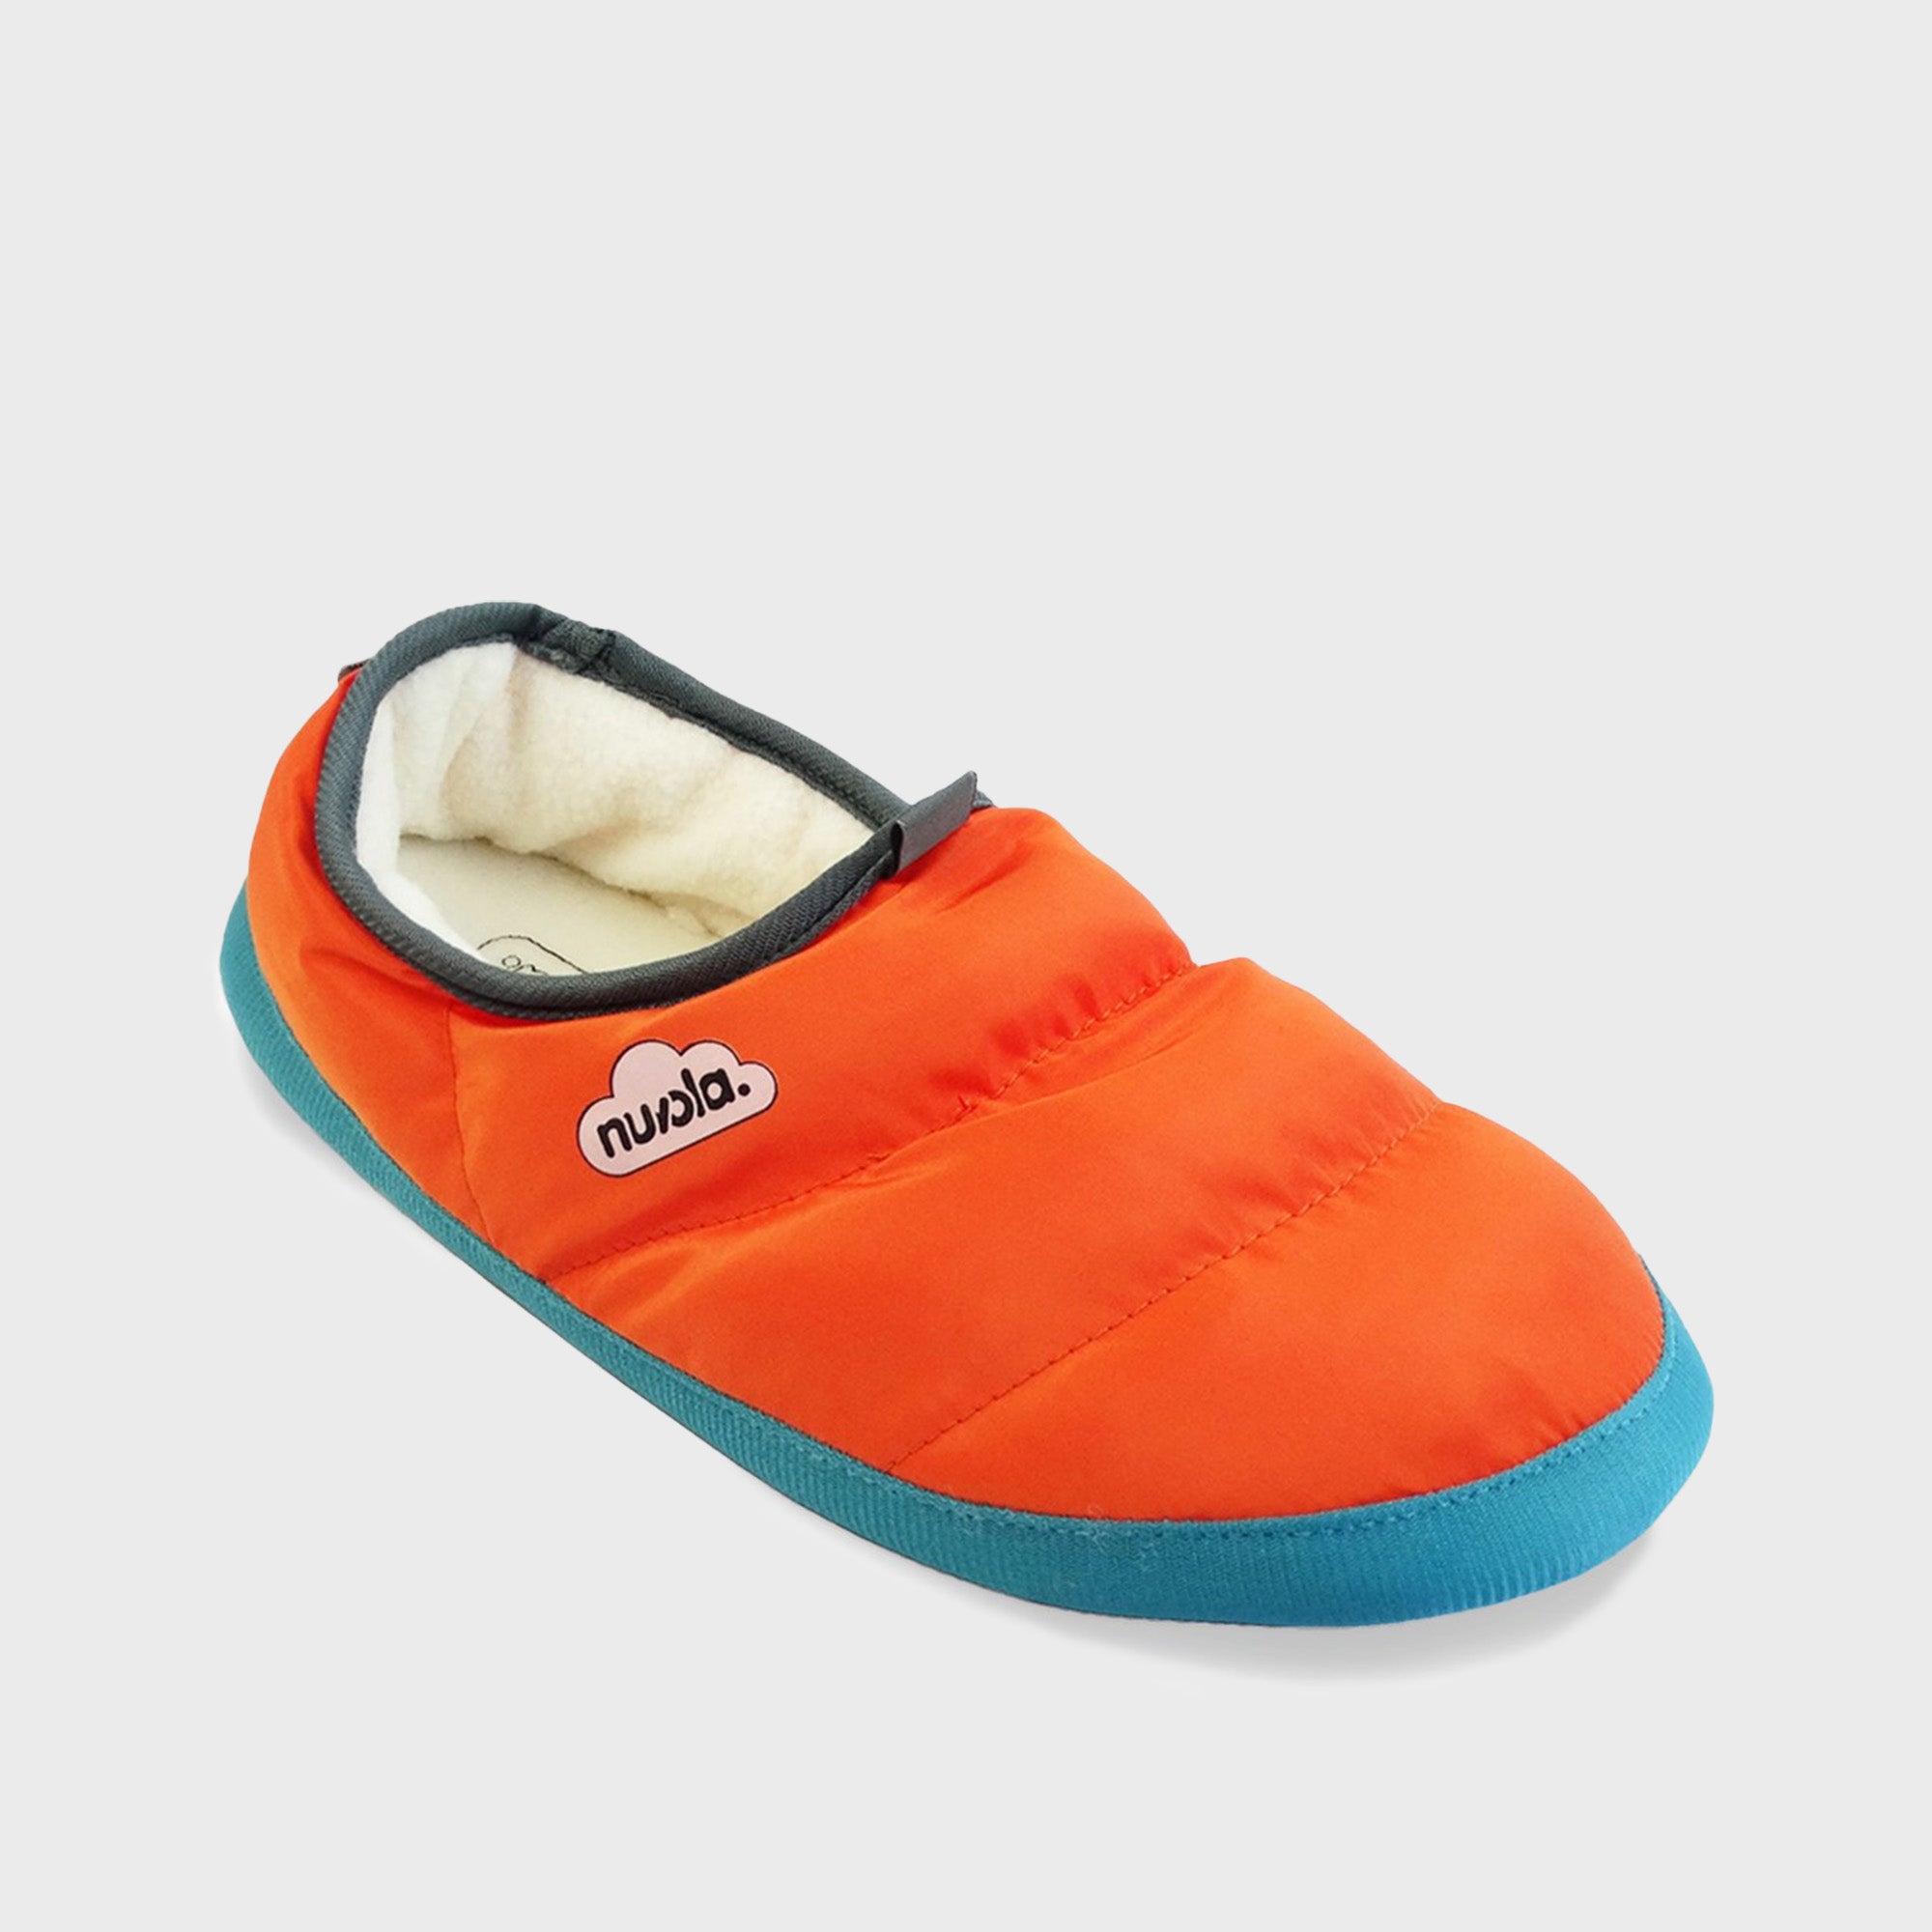 Nuvola Classic Party Slippers Kids in Orange CNCLPRTY13 FROM EIGHTYWINGOLD - OFFICIAL BRAND PARTNER